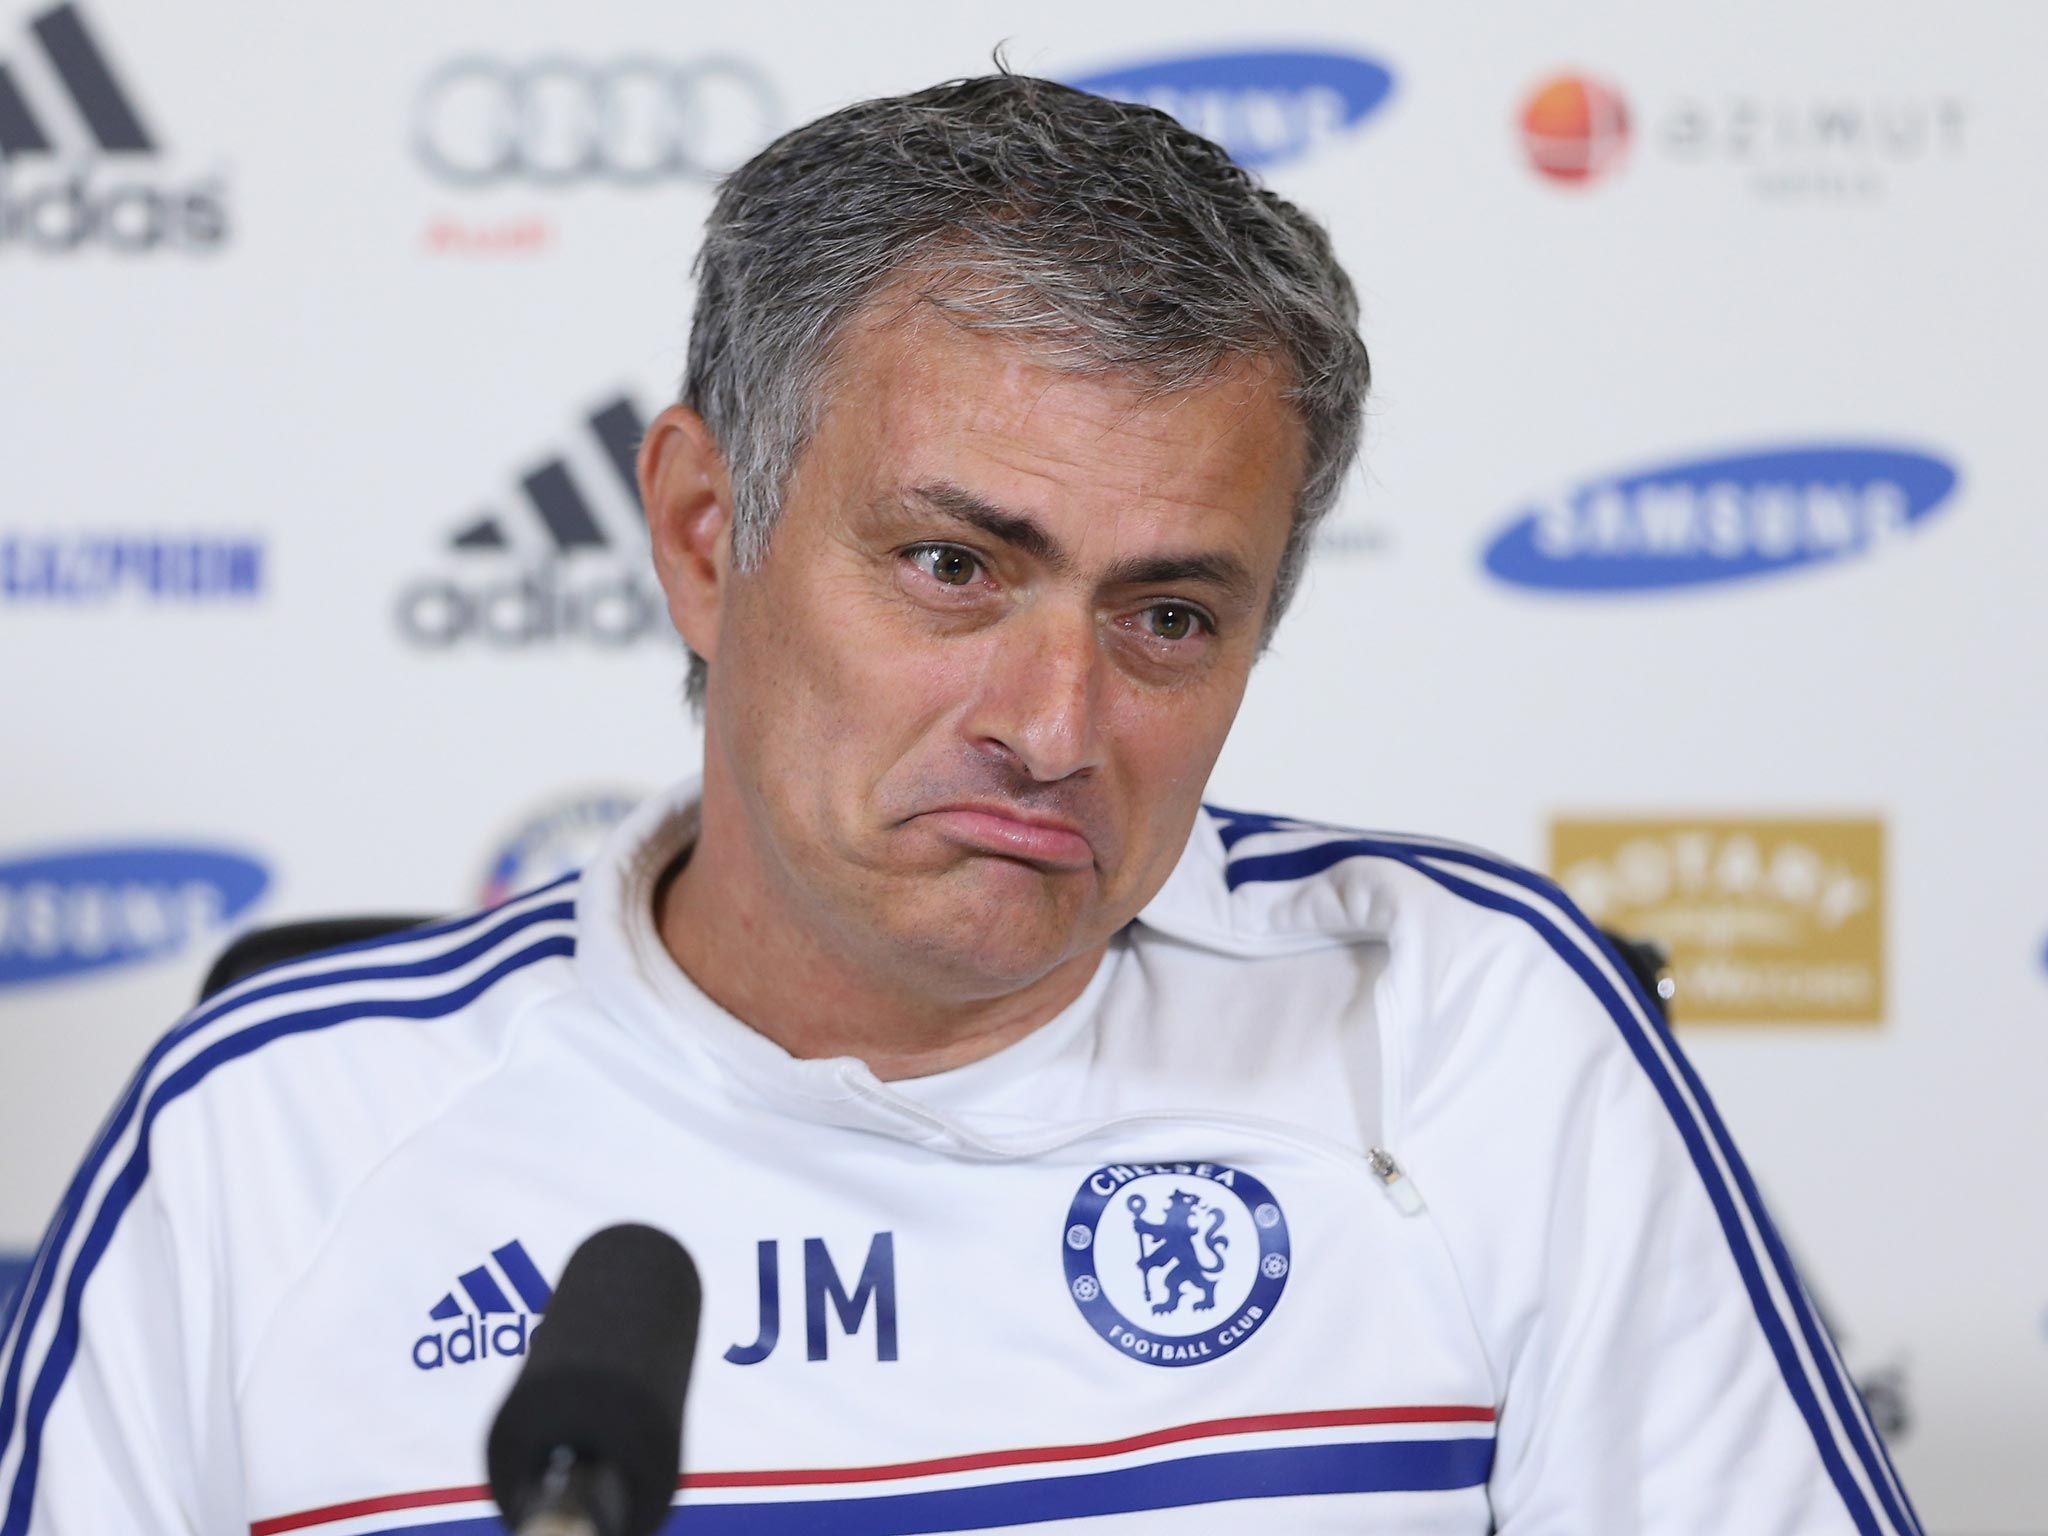 Jose Mourinho is maintaining a consistent line in limiting expectations